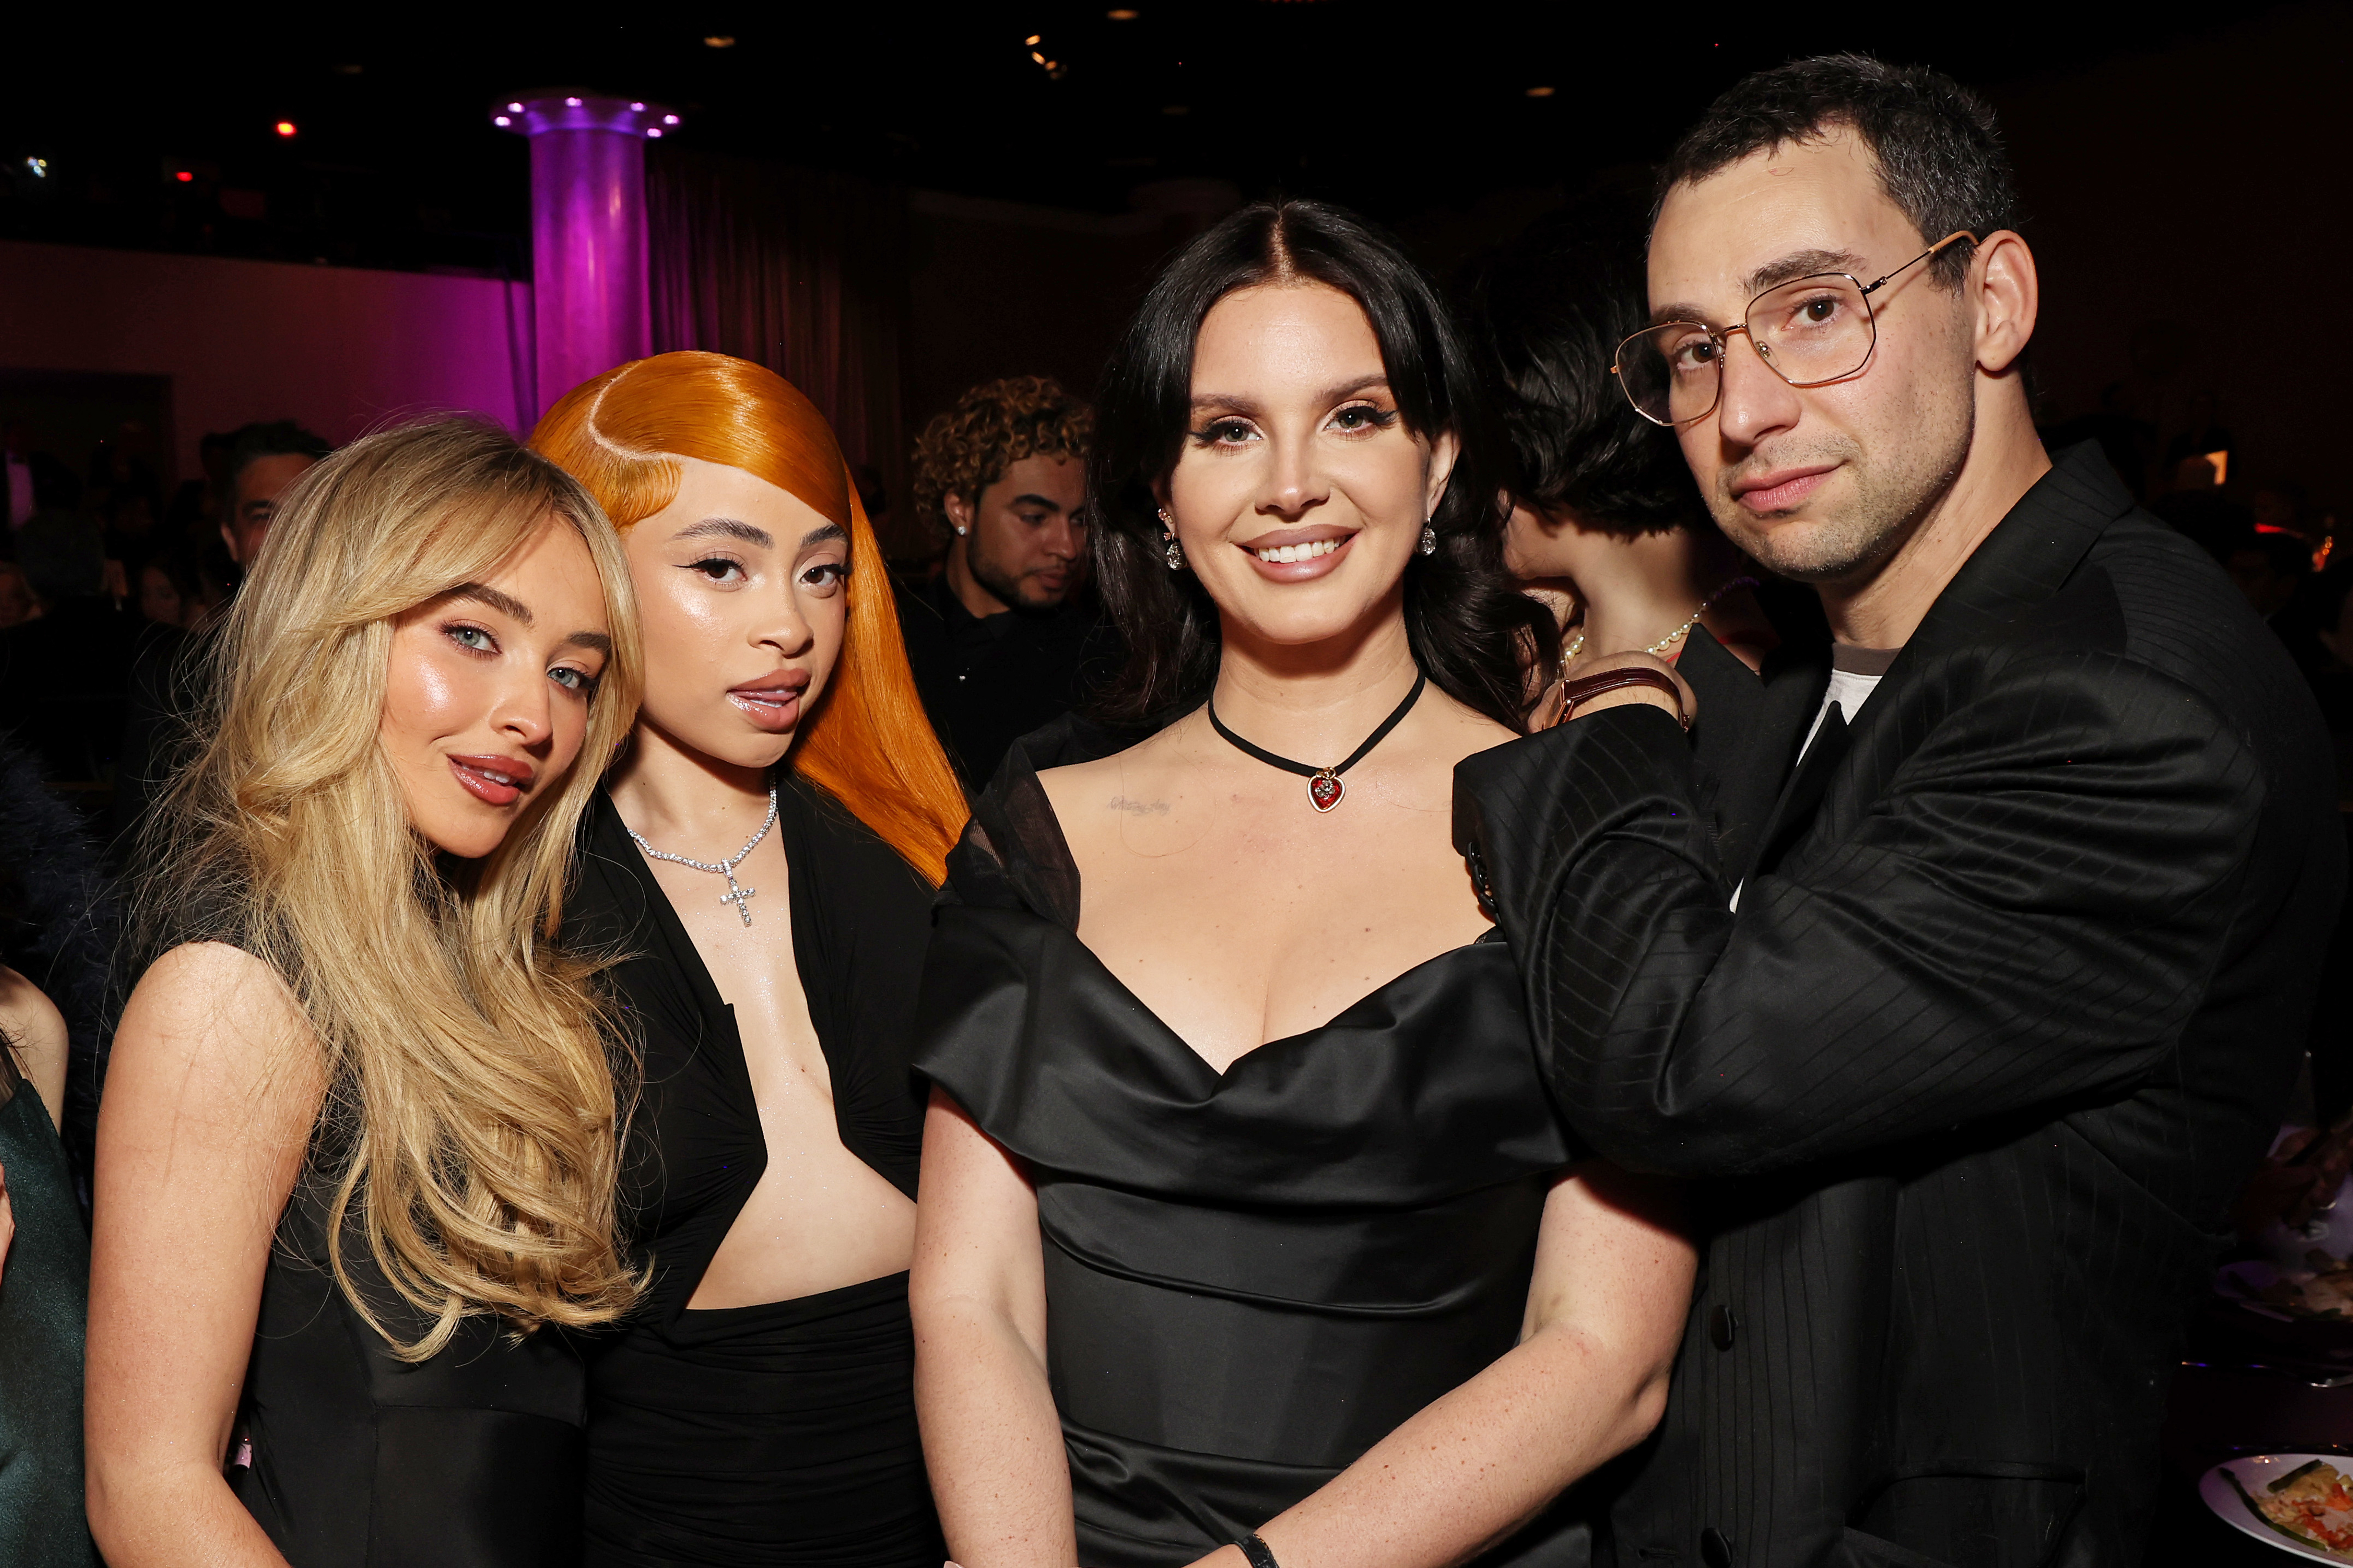 Sabrina Carpenter, Ice Spice, Lana Del Rey, and Jack Antonoff stand together at an event. All are wearing formal black attire and smiling at the camera